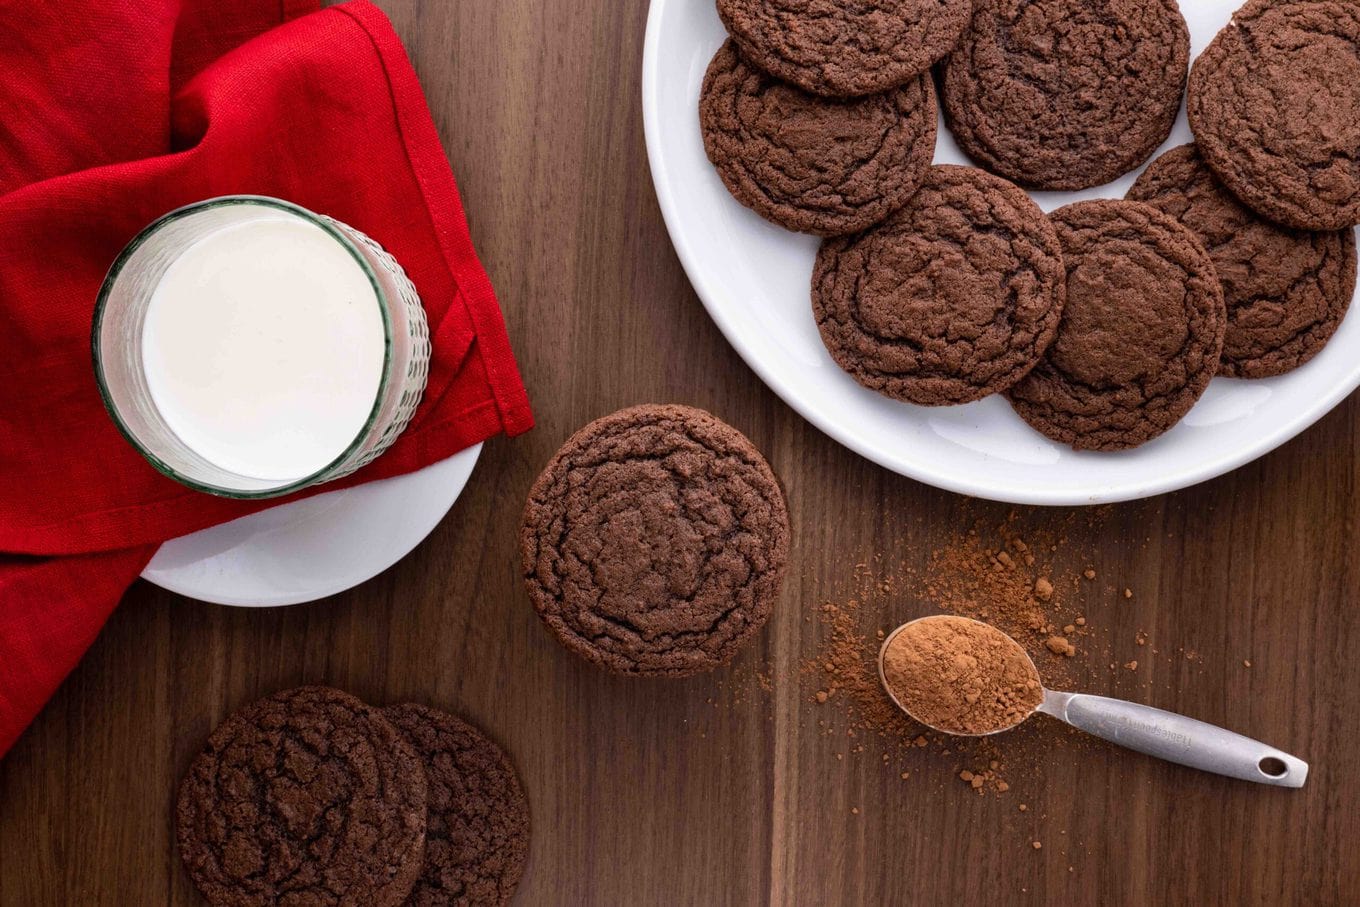 Chocolate Cookies on serving plate with glass of milk